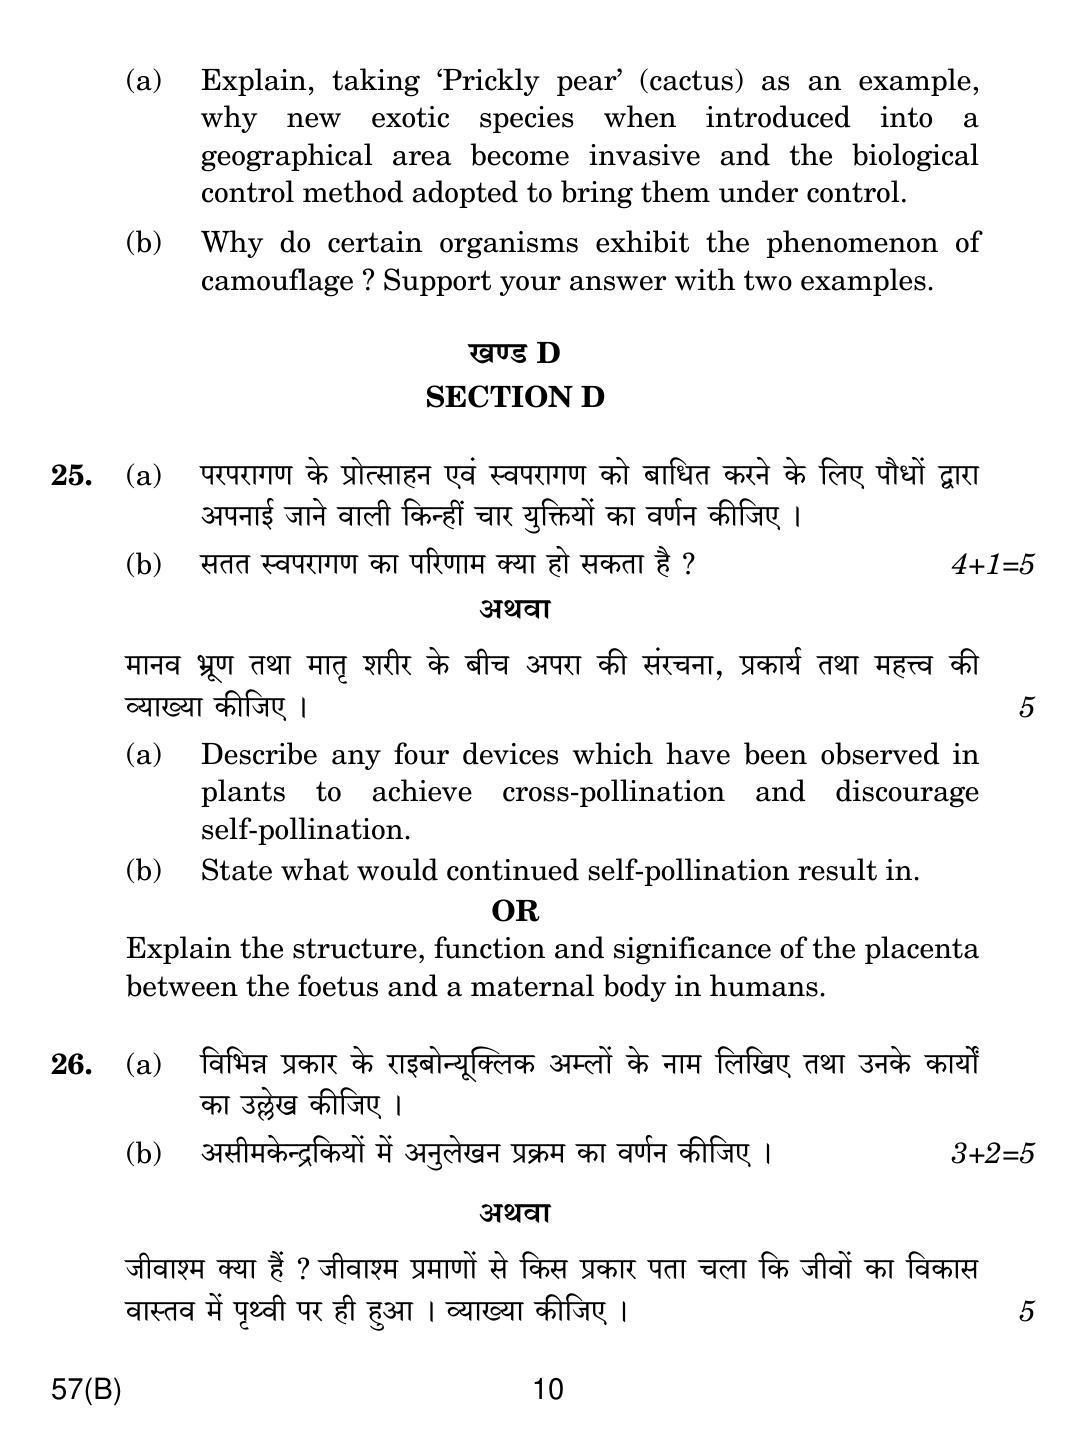 CBSE Class 12 57(B) Biology For Blind 2019 Question Paper - Page 10